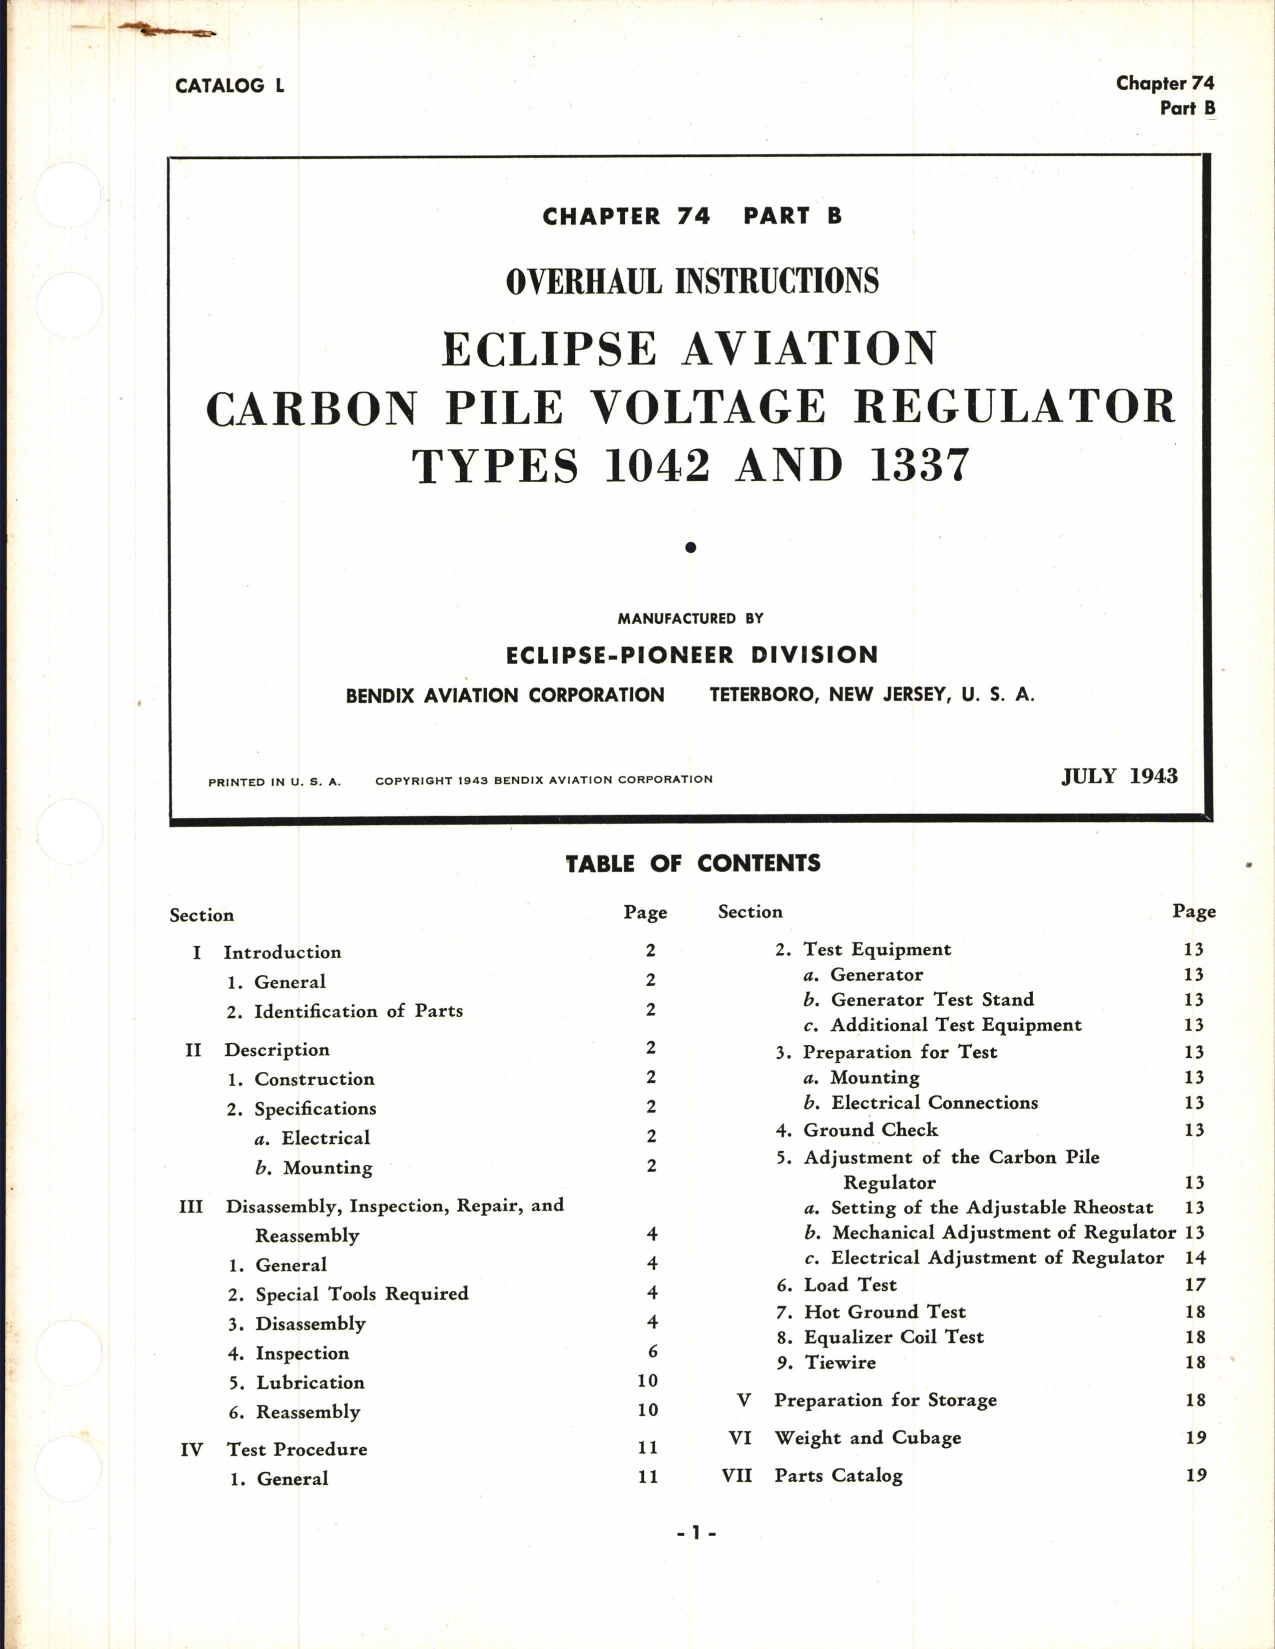 Sample page 1 from AirCorps Library document: Overhaul Instructions for Carbon Pile Voltage Regulator Types 1042 and 1337